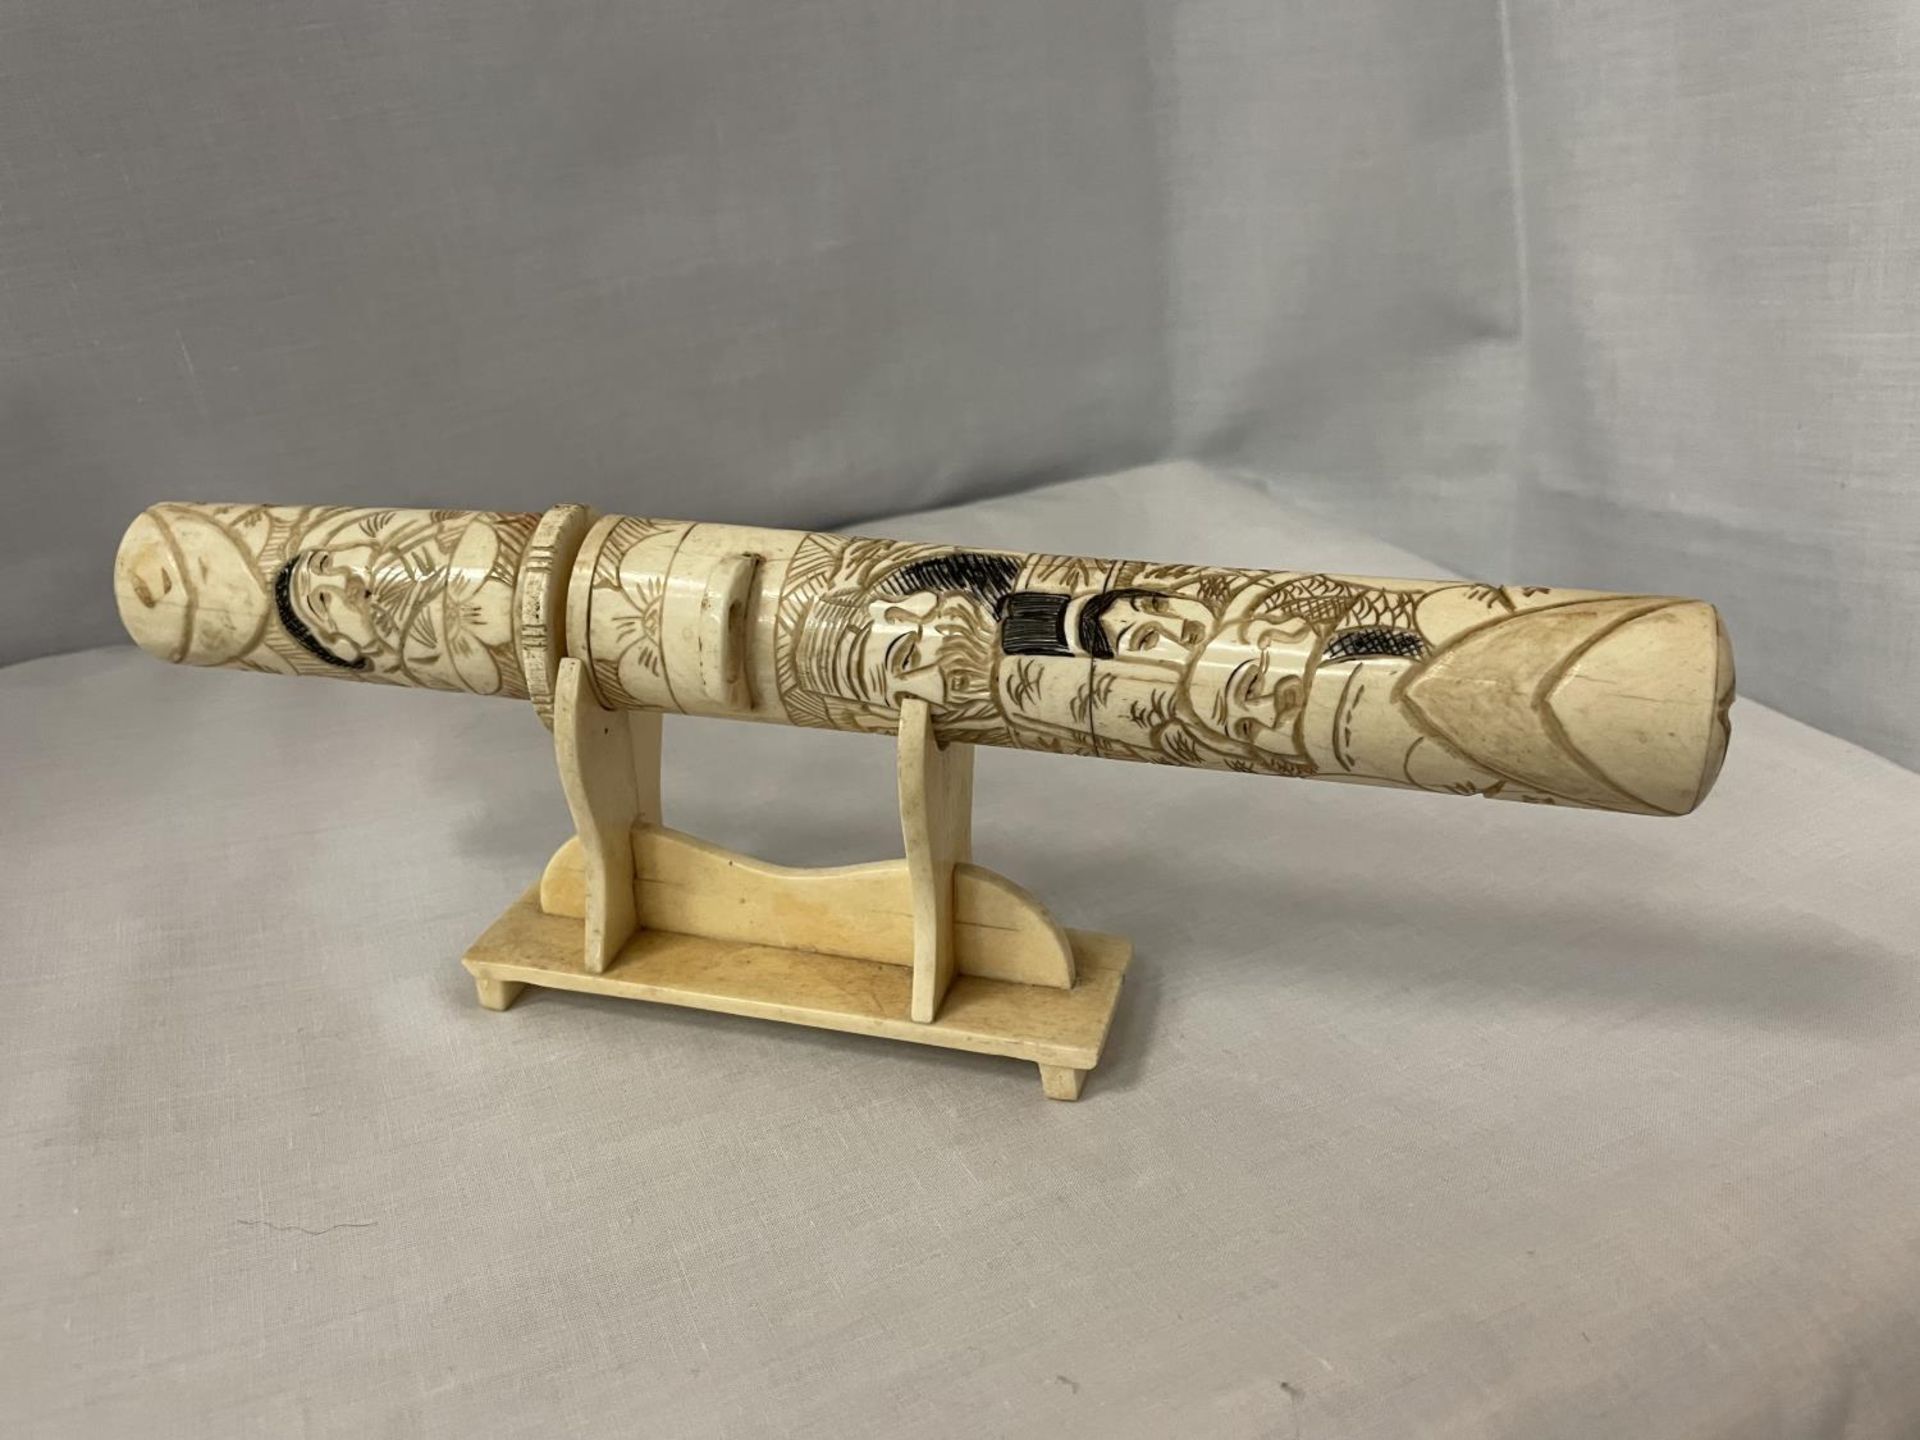 A DECORATIVE BONE 'HEMPEL'S' LETTER OPENER ON STAND DEPICTING ORIENTAL STYLE SCENES - Image 2 of 4